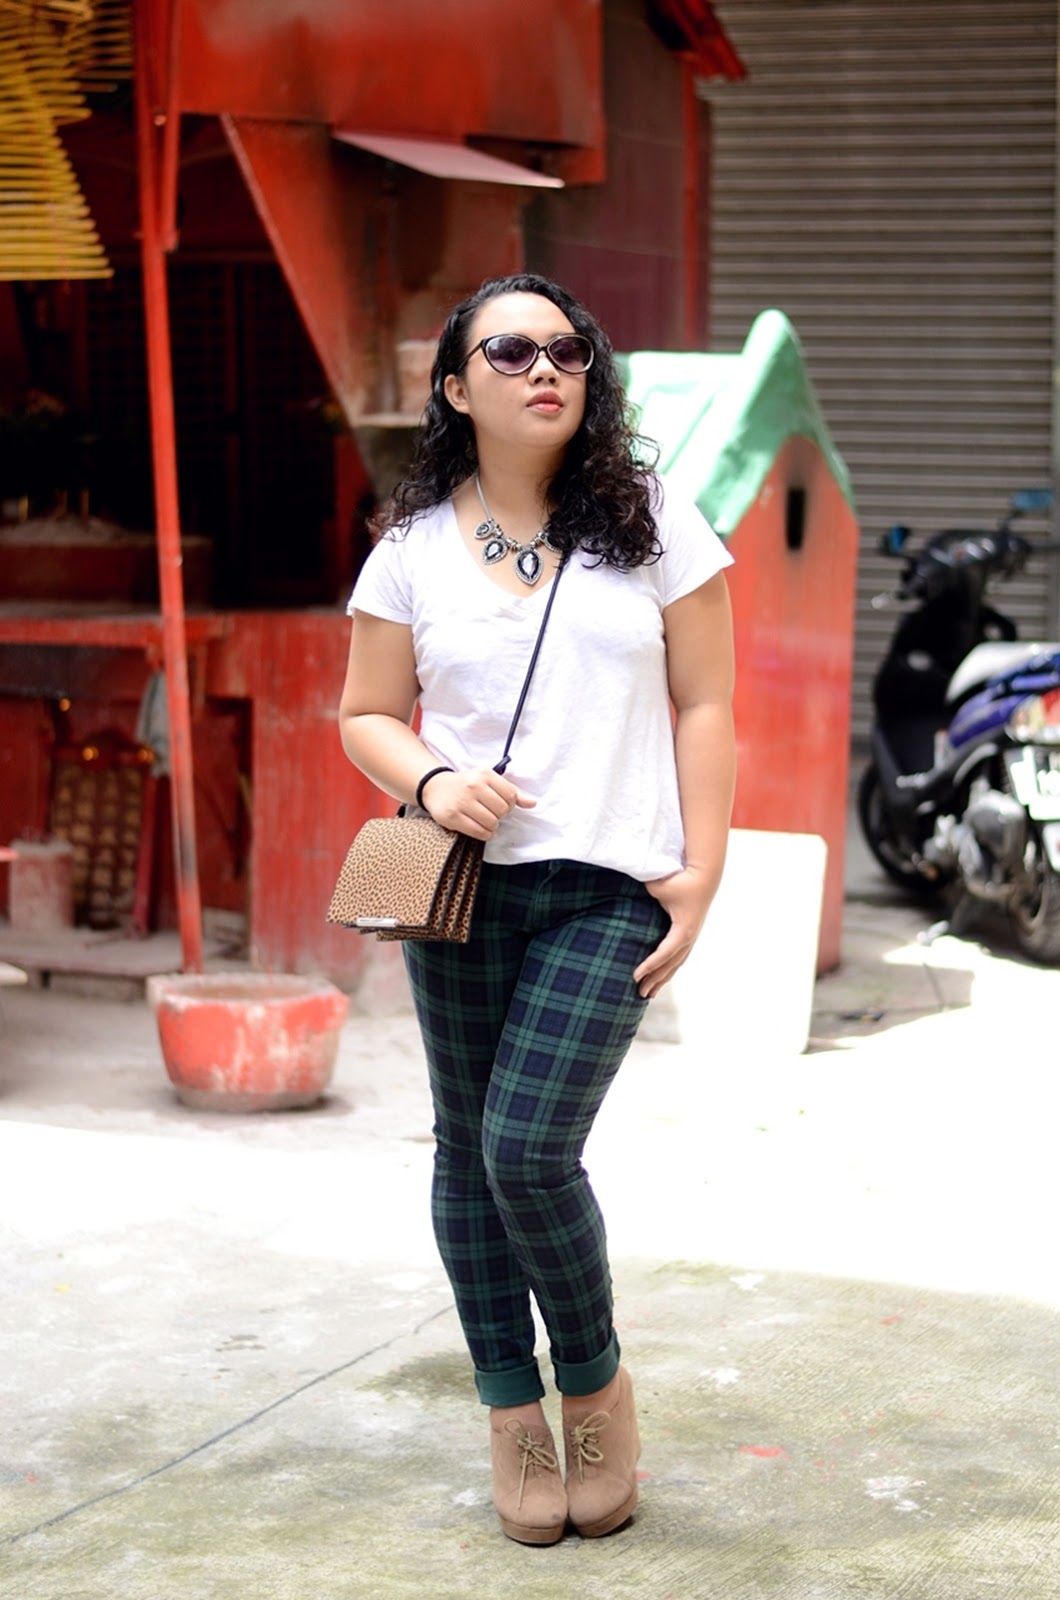 Effortless - StyleChe | A Fashion and Lifestyle Blog from Macau